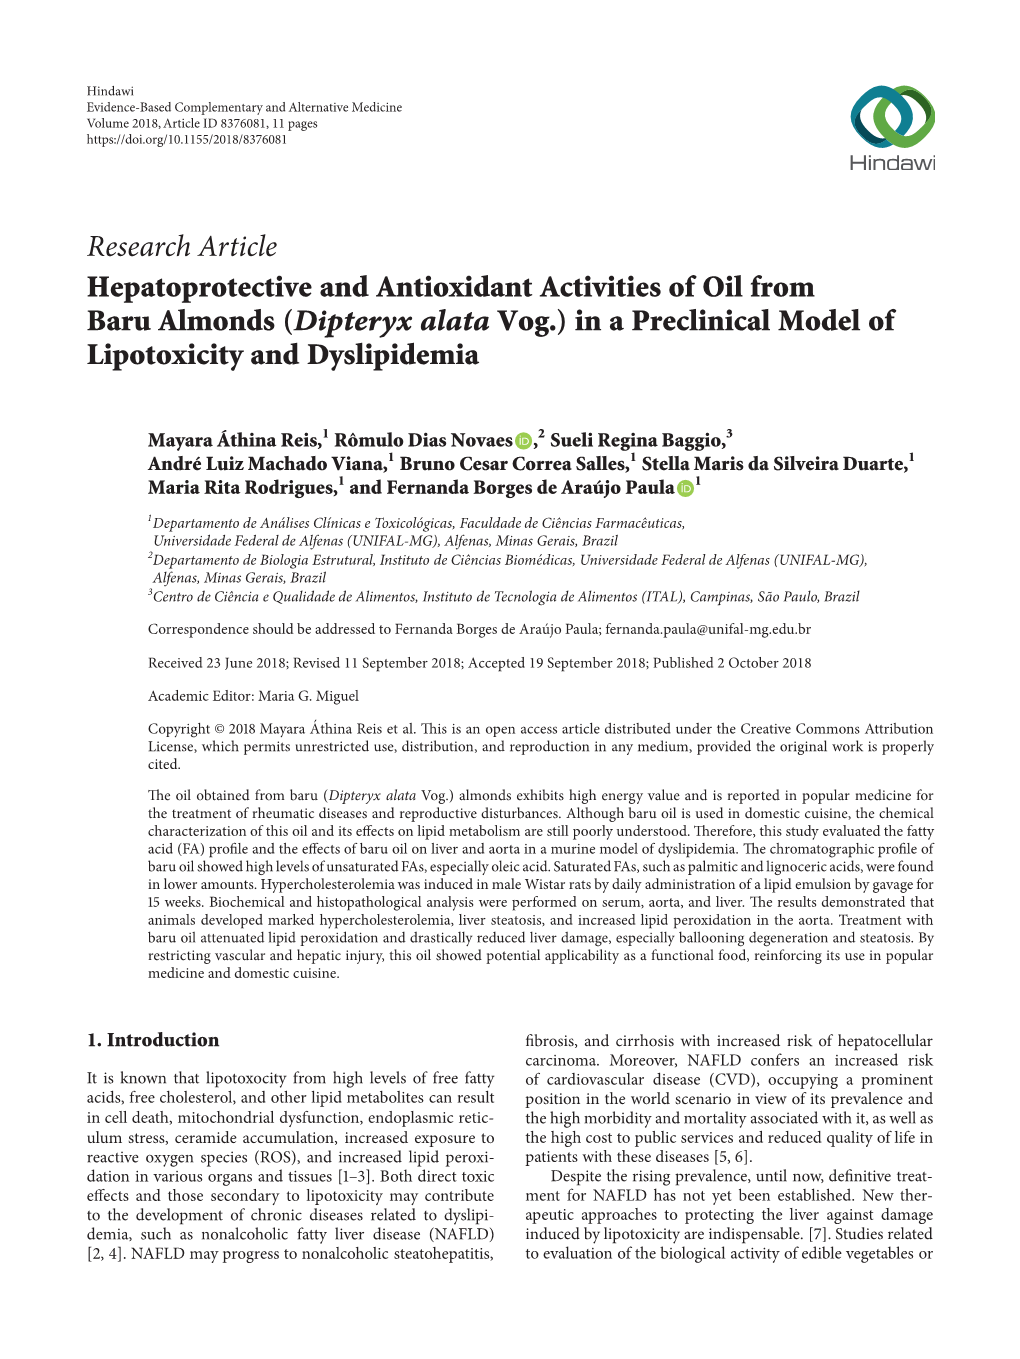 Hepatoprotective and Antioxidant Activities of Oil from Baru Almonds (Dipteryx Alata Vog.) in a Preclinical Model of Lipotoxicity and Dyslipidemia